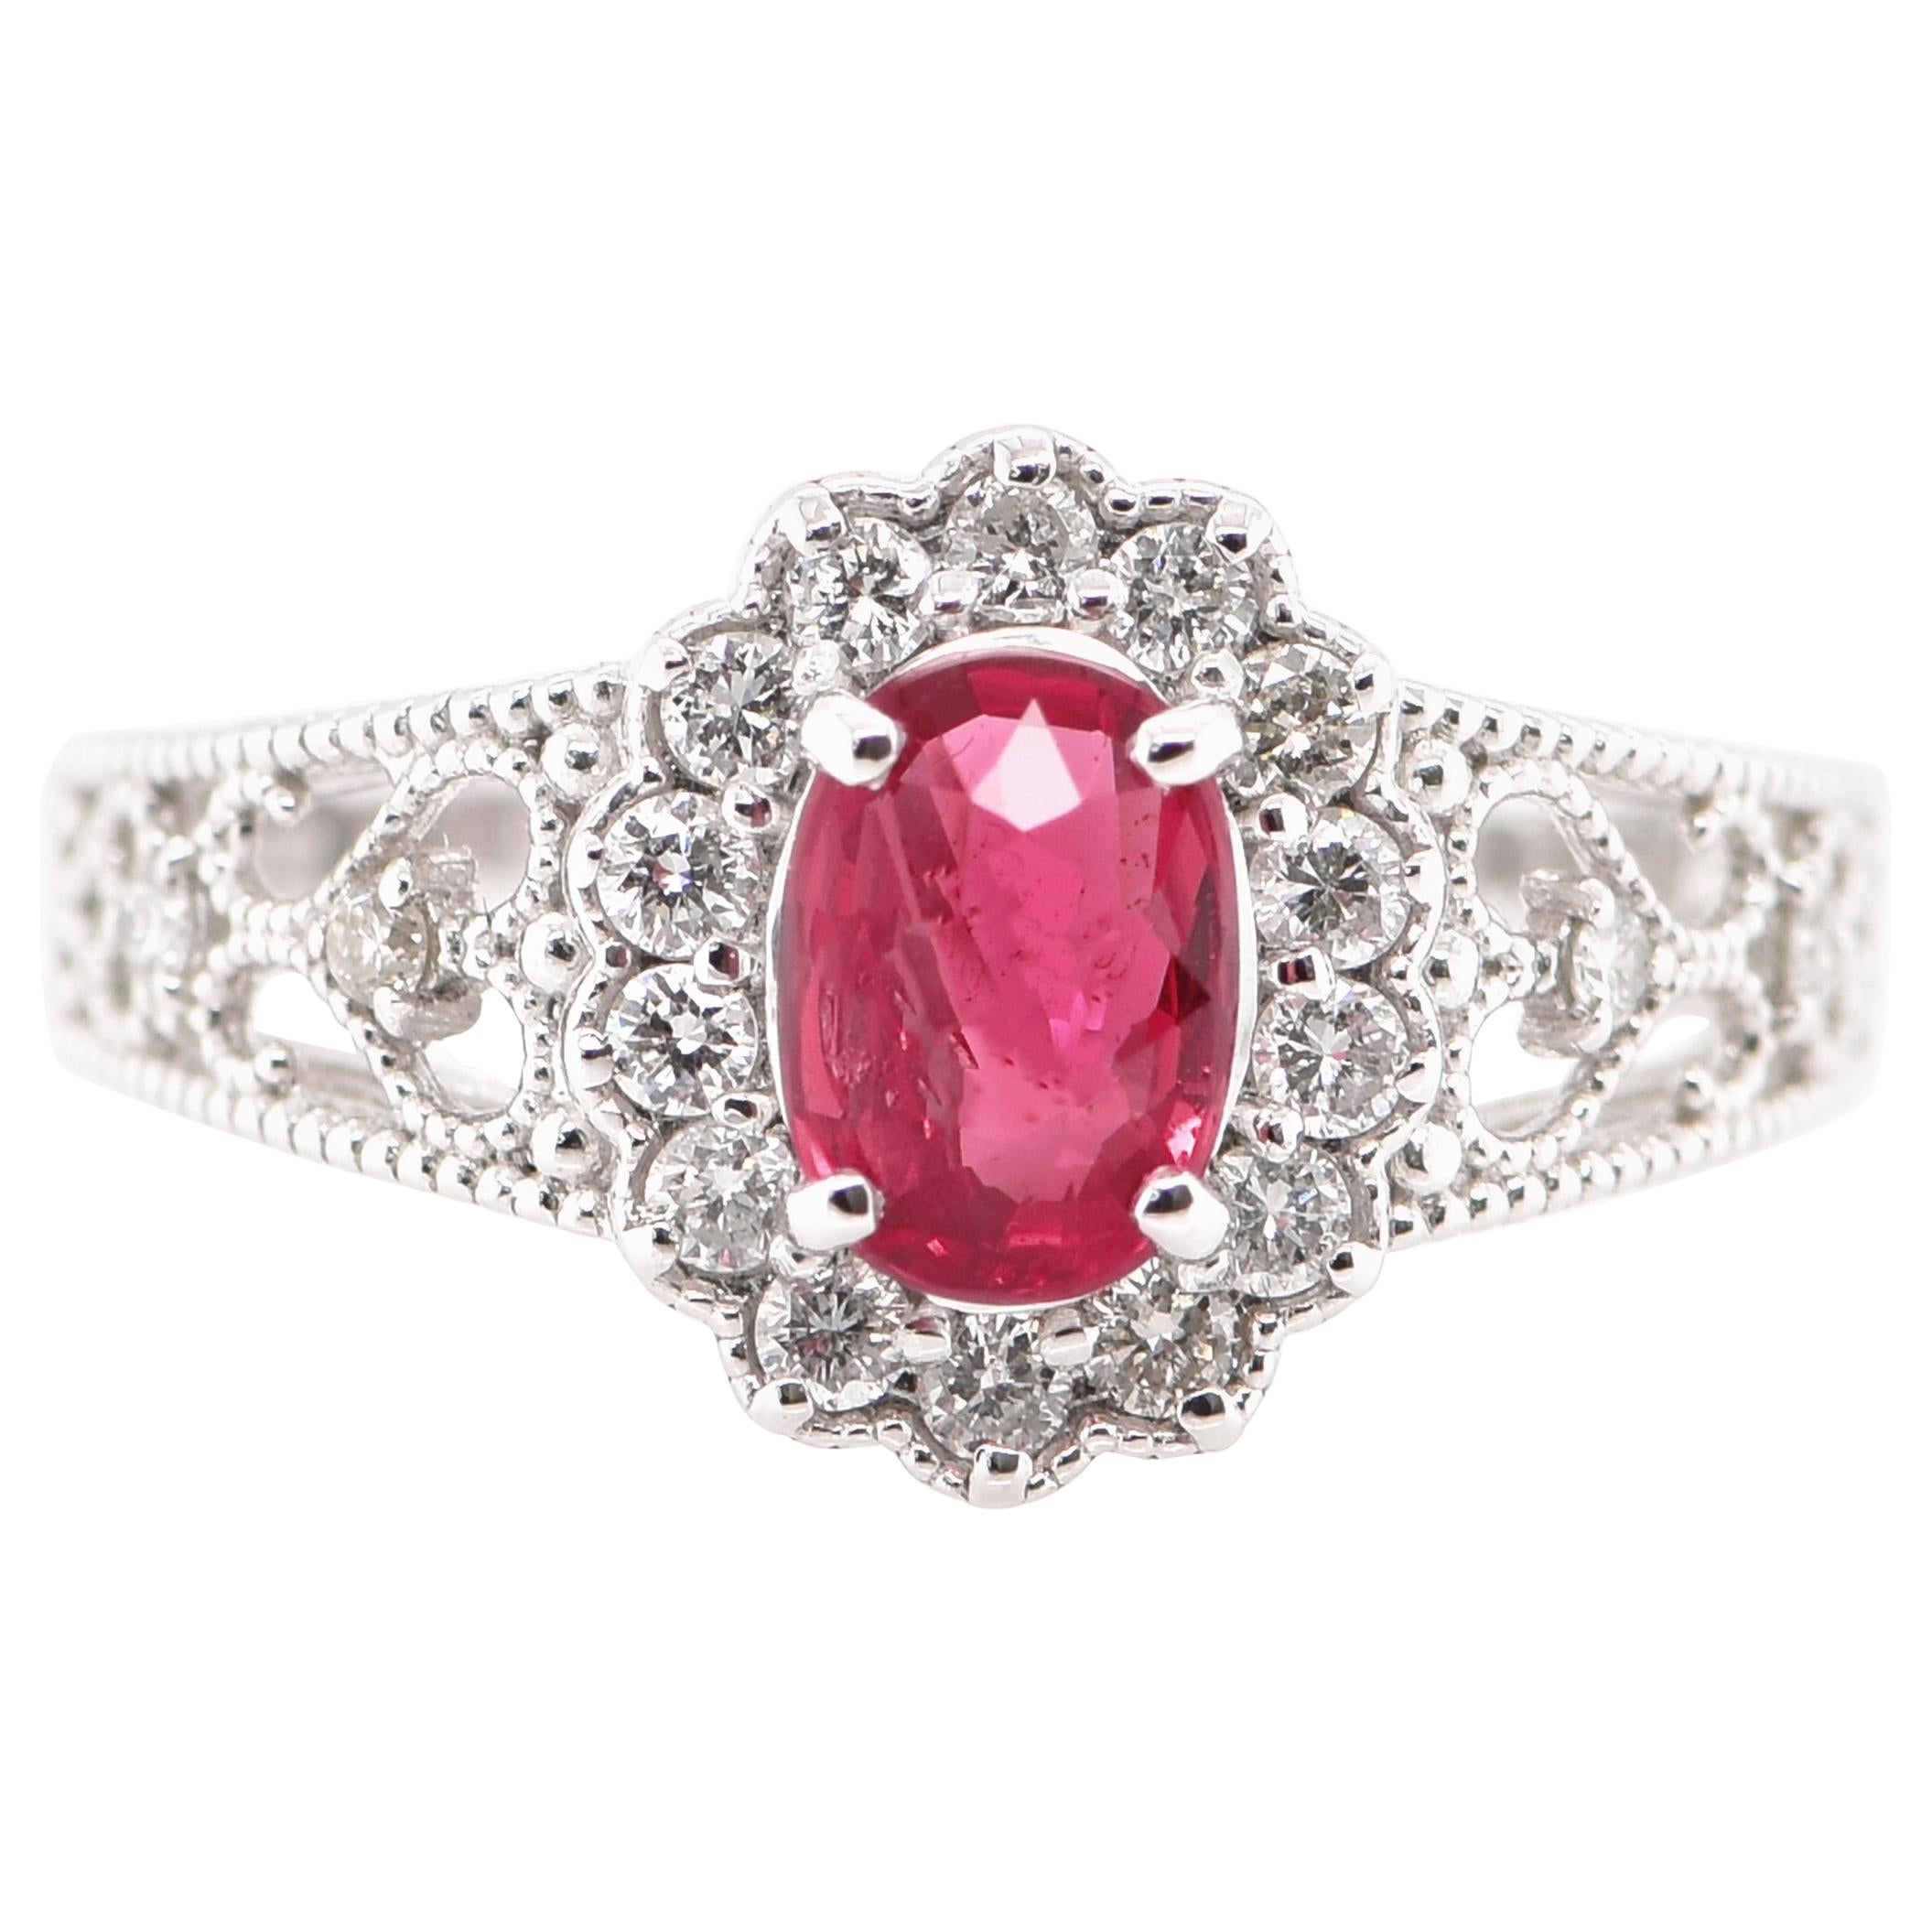 1.006 Carat Natural Untreated 'No Heat' Ruby and Diamond Ring Set in Platinum